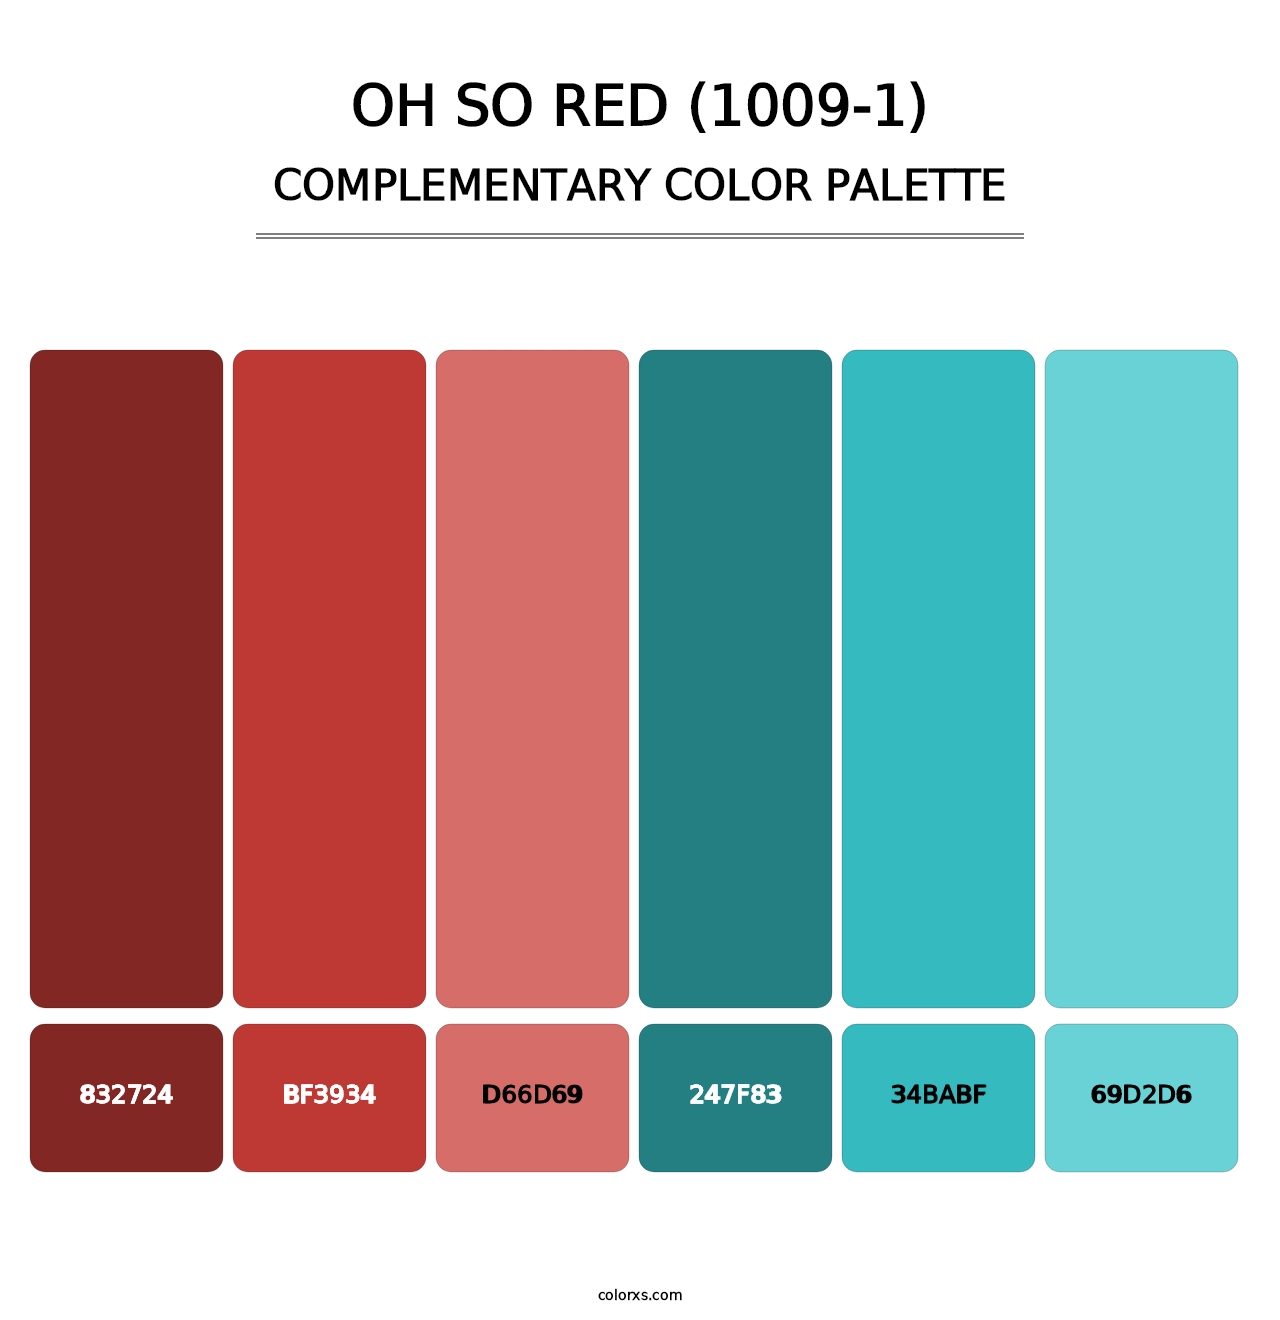 Oh So Red (1009-1) - Complementary Color Palette